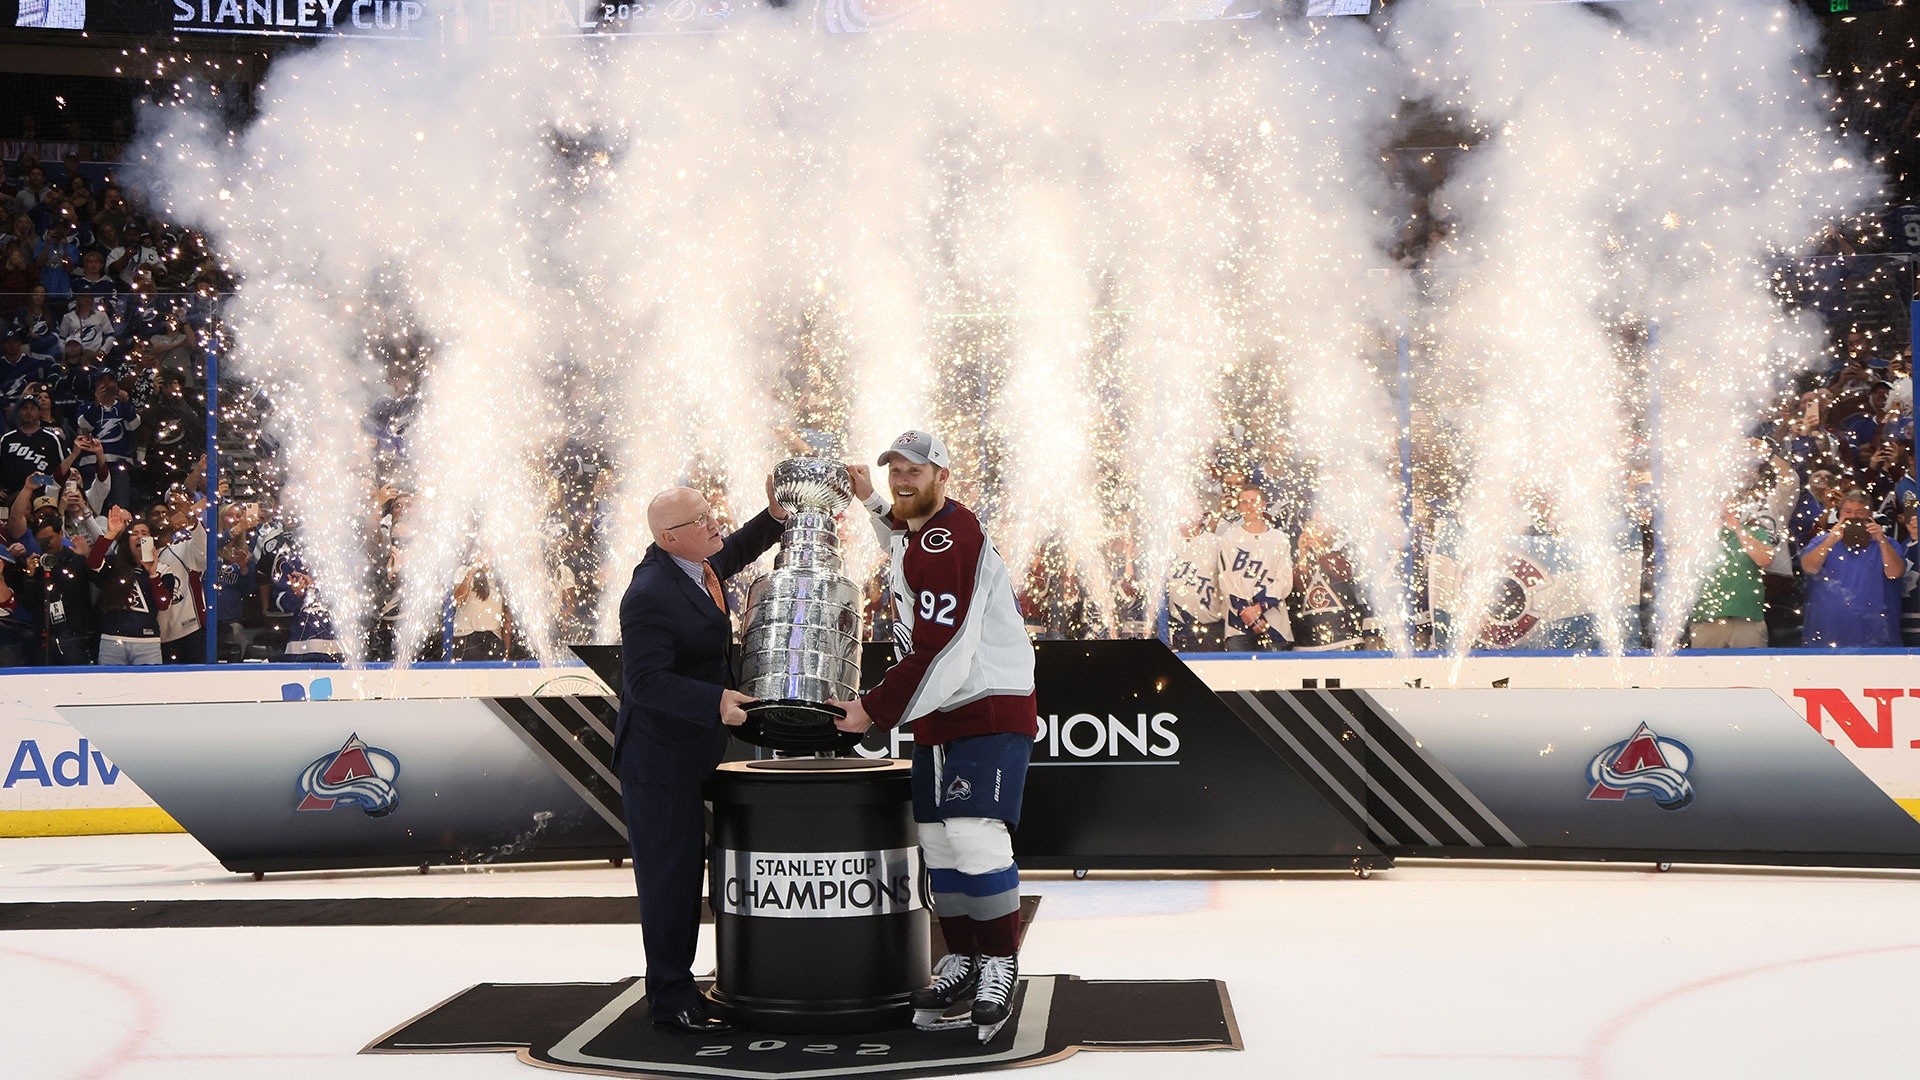 PHOTOS: Colorado Avalanche celebrate with Stanley Cup once more as